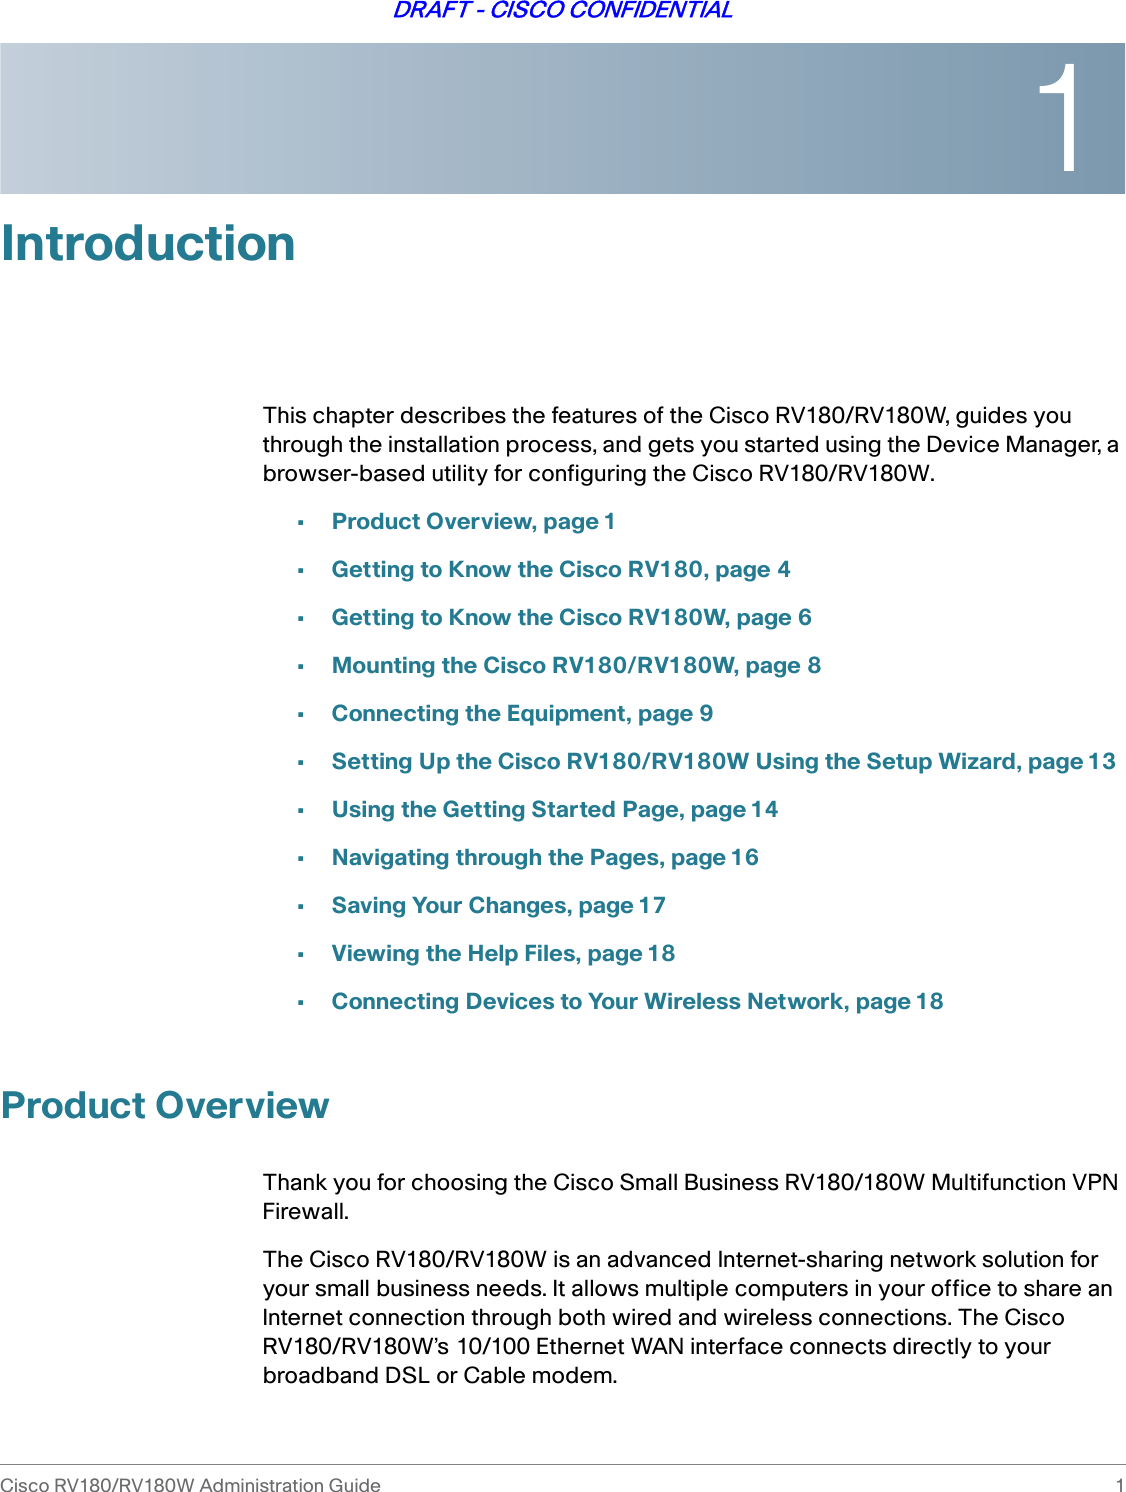 1Cisco RV180/RV180W Administration Guide 1DRAFT - CISCO CONFIDENTIALIntroductionThis chapter describes the features of the Cisco RV180/RV180W, guides you through the installation process, and gets you started using the Device Manager, a browser-based utility for configuring the Cisco RV180/RV180W. •Product Overview, page 1•Getting to Know the Cisco RV180, page 4•Getting to Know the Cisco RV180W, page 6•Mounting the Cisco RV180/RV180W, page 8•Connecting the Equipment, page 9•Setting Up the Cisco RV180/RV180W Using the Setup Wizard, page 13•Using the Getting Started Page, page 14•Navigating through the Pages, page 16•Saving Your Changes, page 17•Viewing the Help Files, page 18•Connecting Devices to Your Wireless Network, page 18Product OverviewThank you for choosing the Cisco Small Business RV180/180W Multifunction VPN Firewall. The Cisco RV180/RV180W is an advanced Internet-sharing network solution for your small business needs. It allows multiple computers in your office to share an Internet connection through both wired and wireless connections. The Cisco RV180/RV180W’s 10/100 Ethernet WAN interface connects directly to your broadband DSL or Cable modem. 